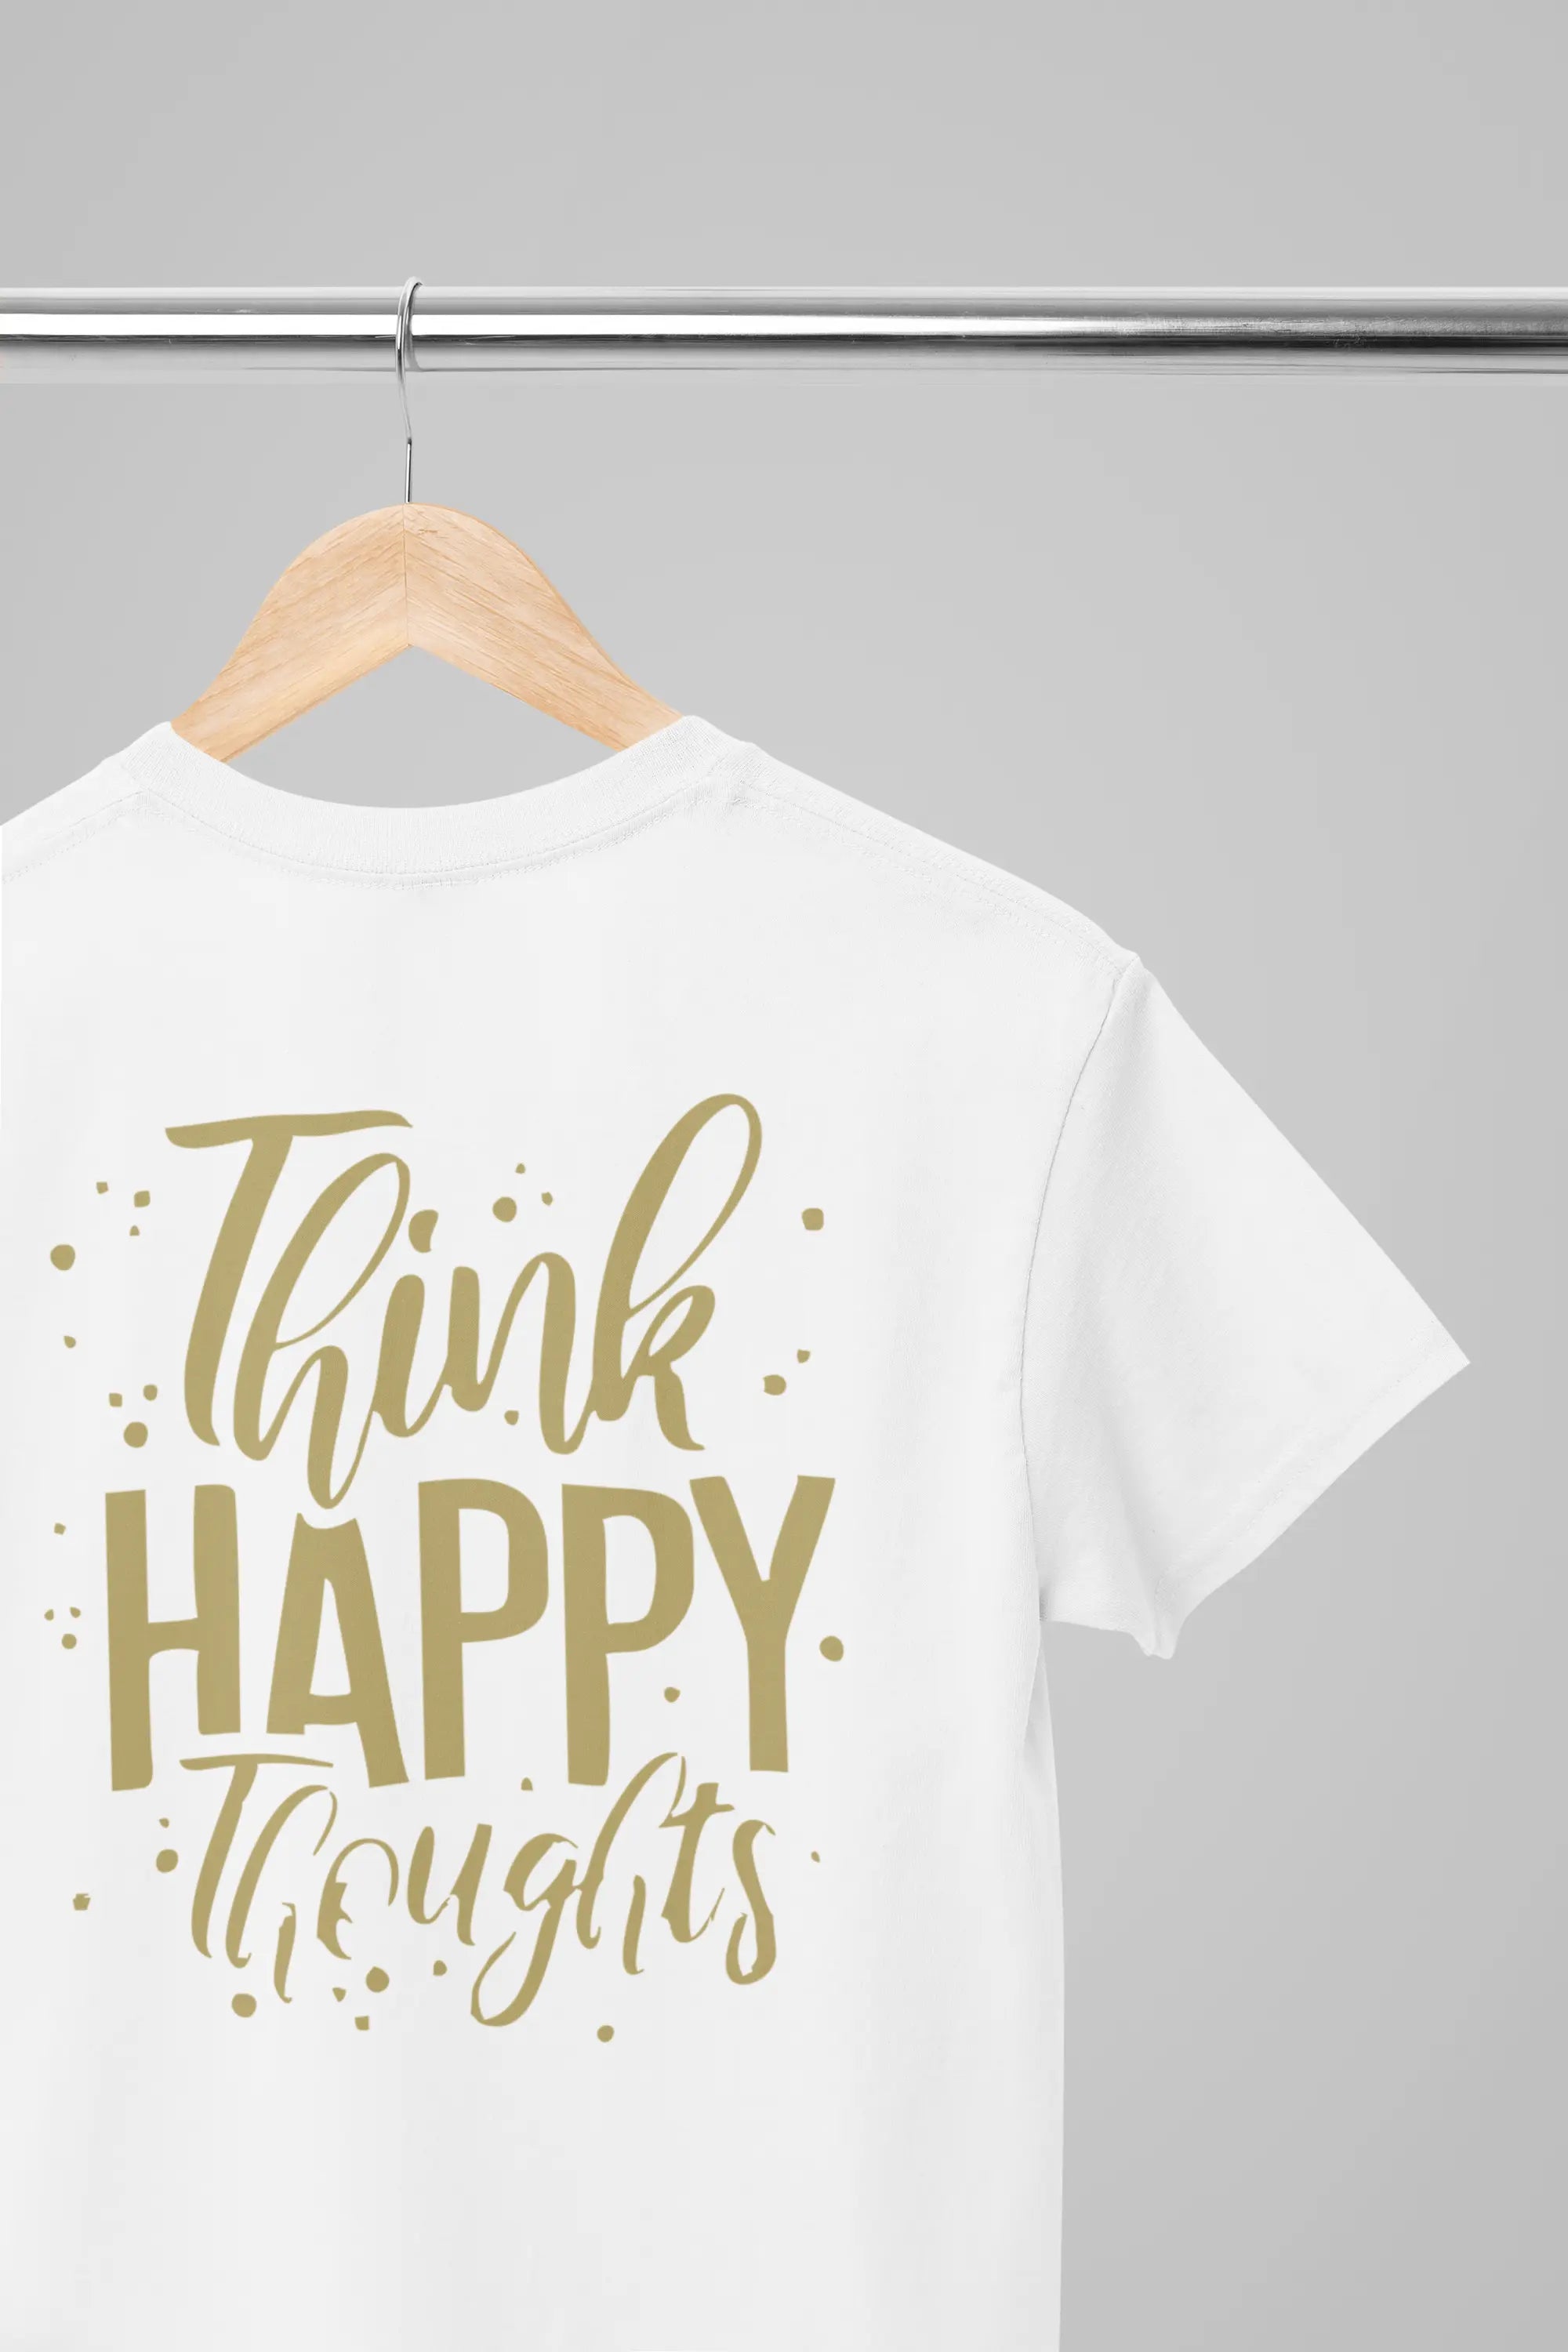 Think Happy Thoughts T shirt - Image #7